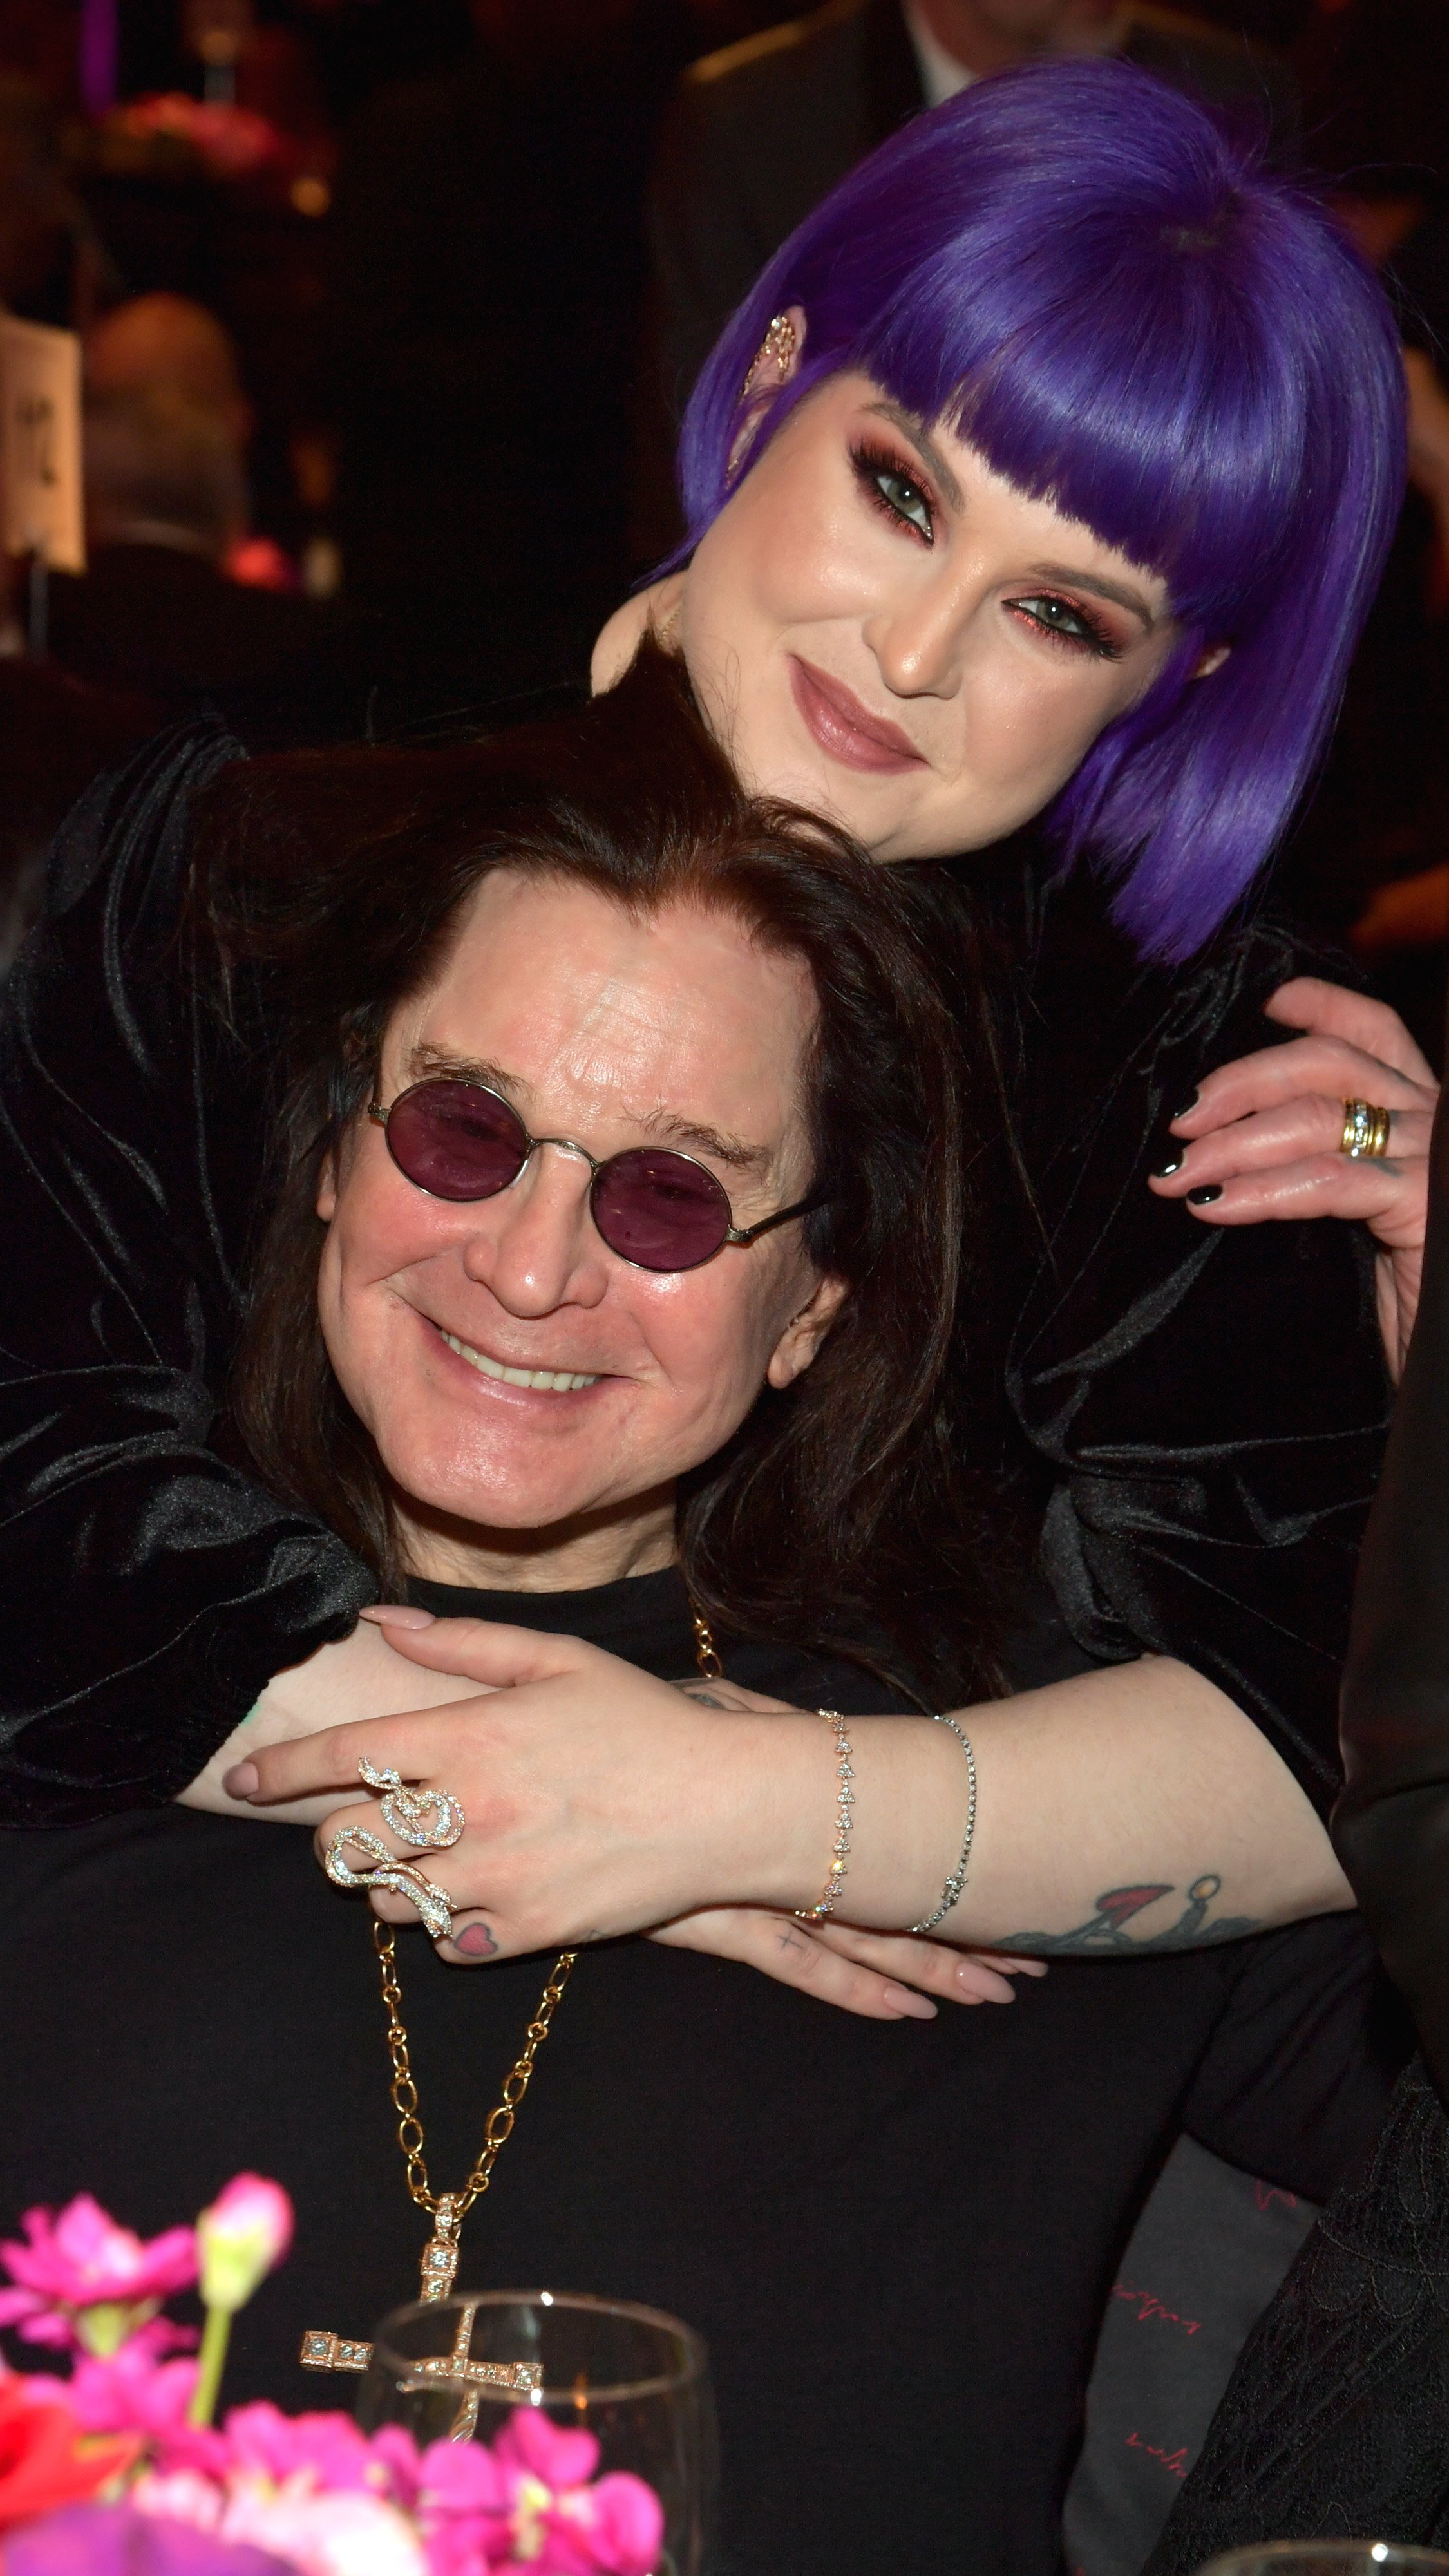 Kelly Osbourne and Ozzy Osbourne attend the Pre-Grammy Gala on January 25, 2020 in Beverly Hills, California. ┃Source: Getty Images